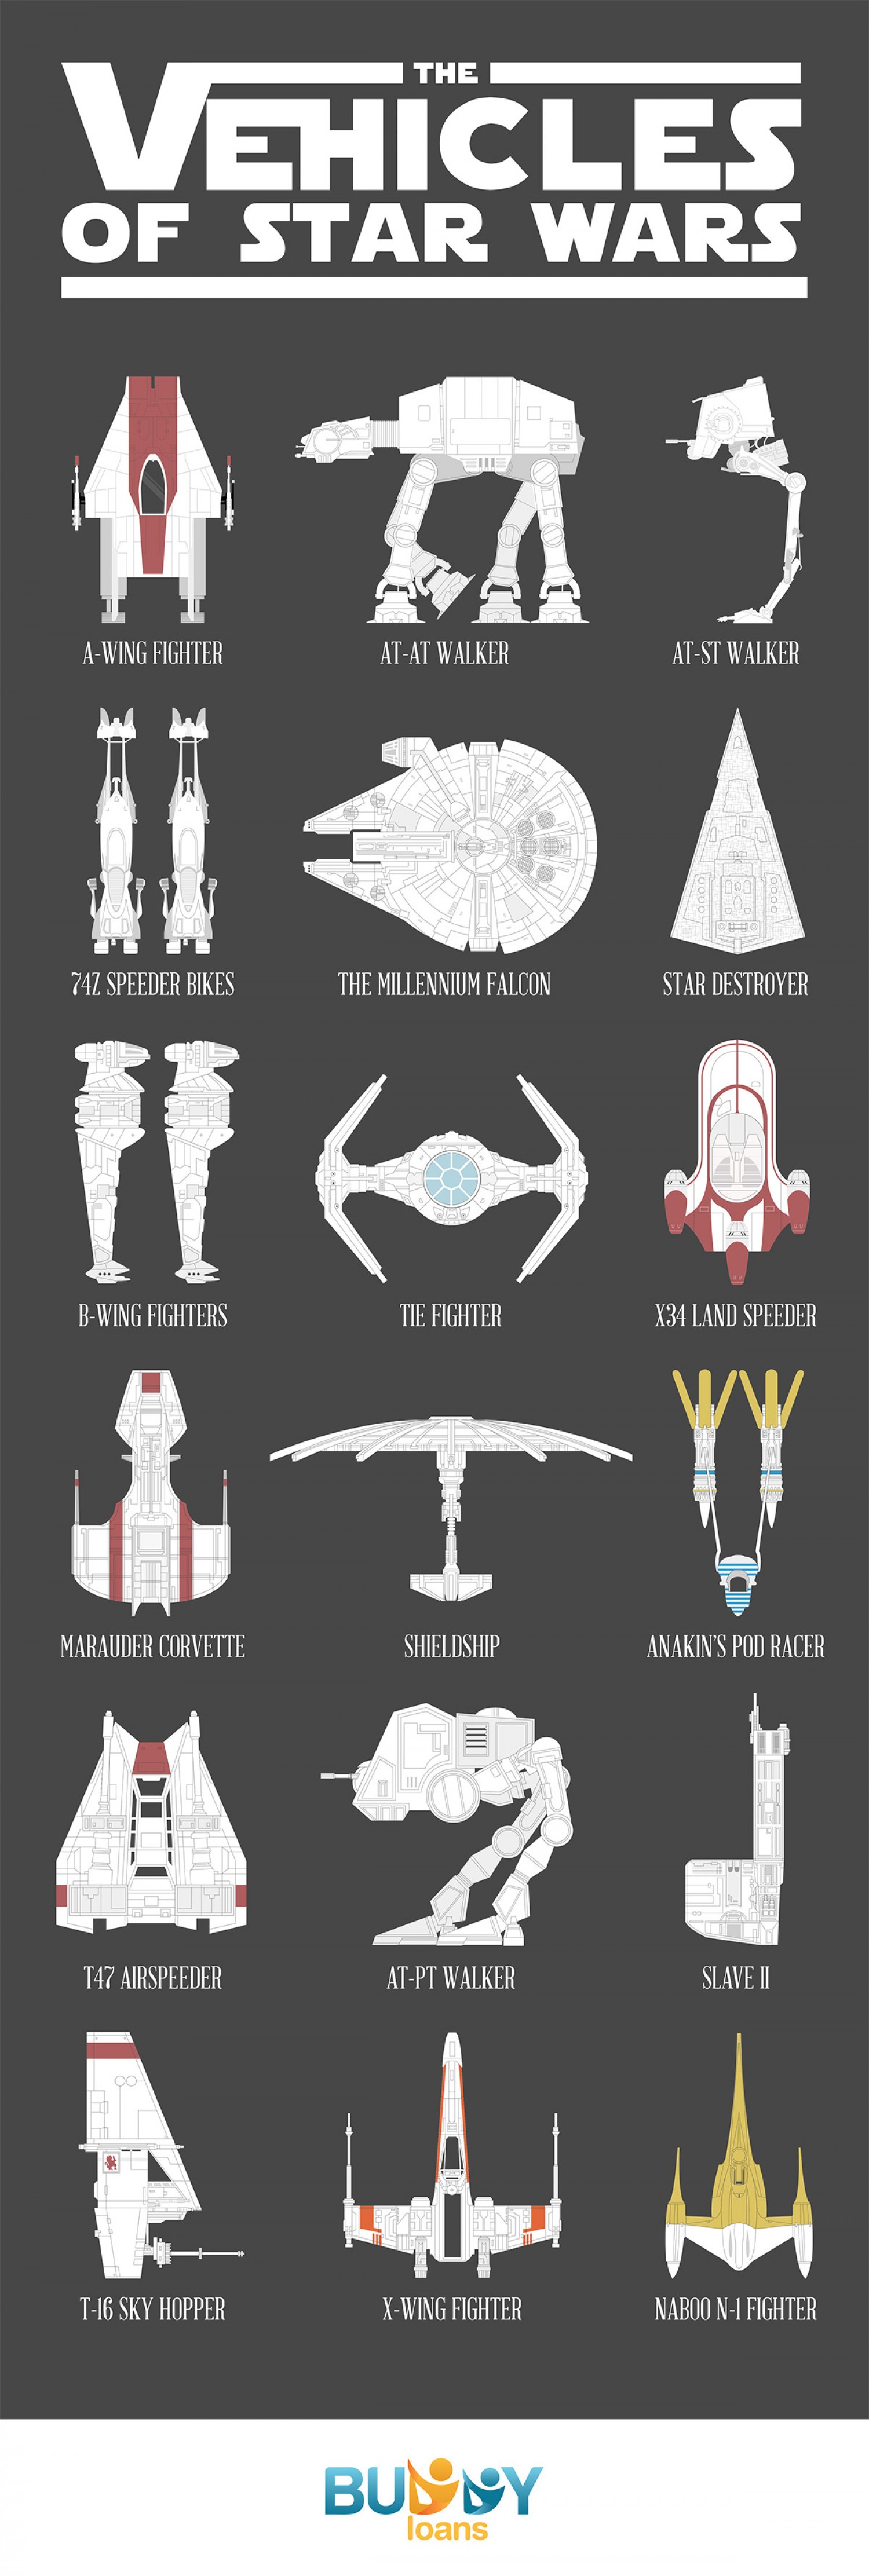 the vehicles of star wars